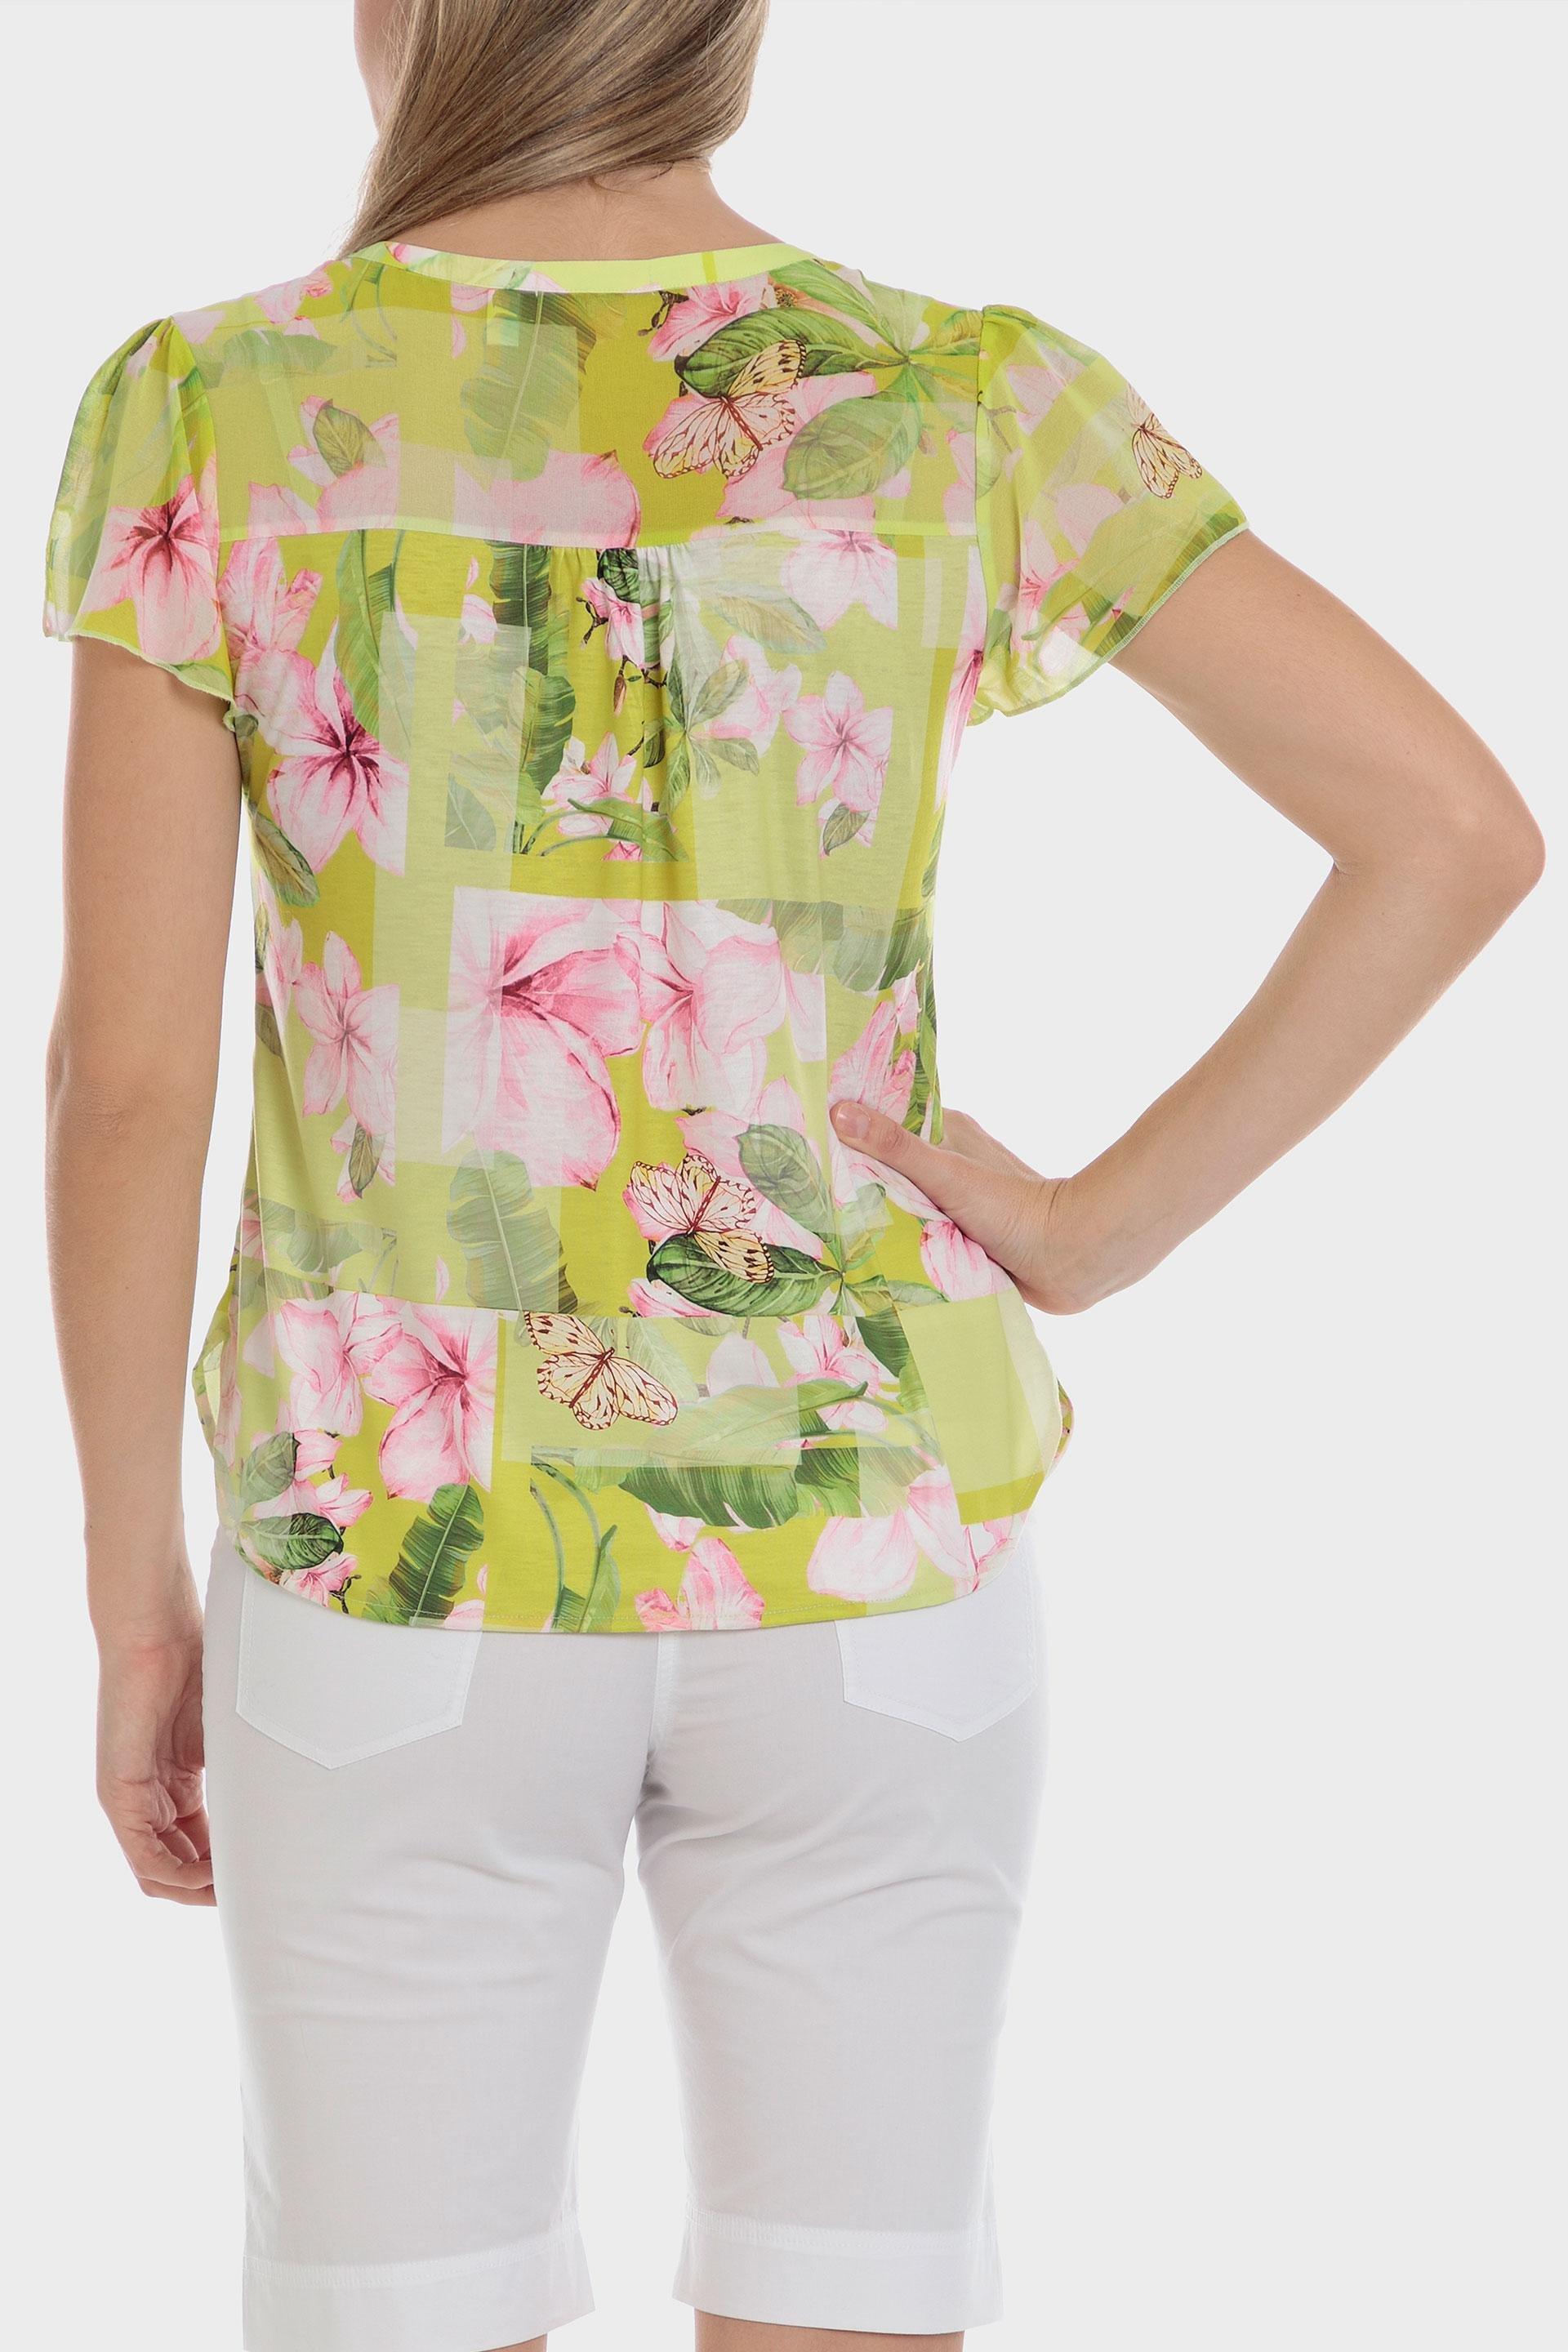 Punt Roma - Yellow Floral Print Blouse